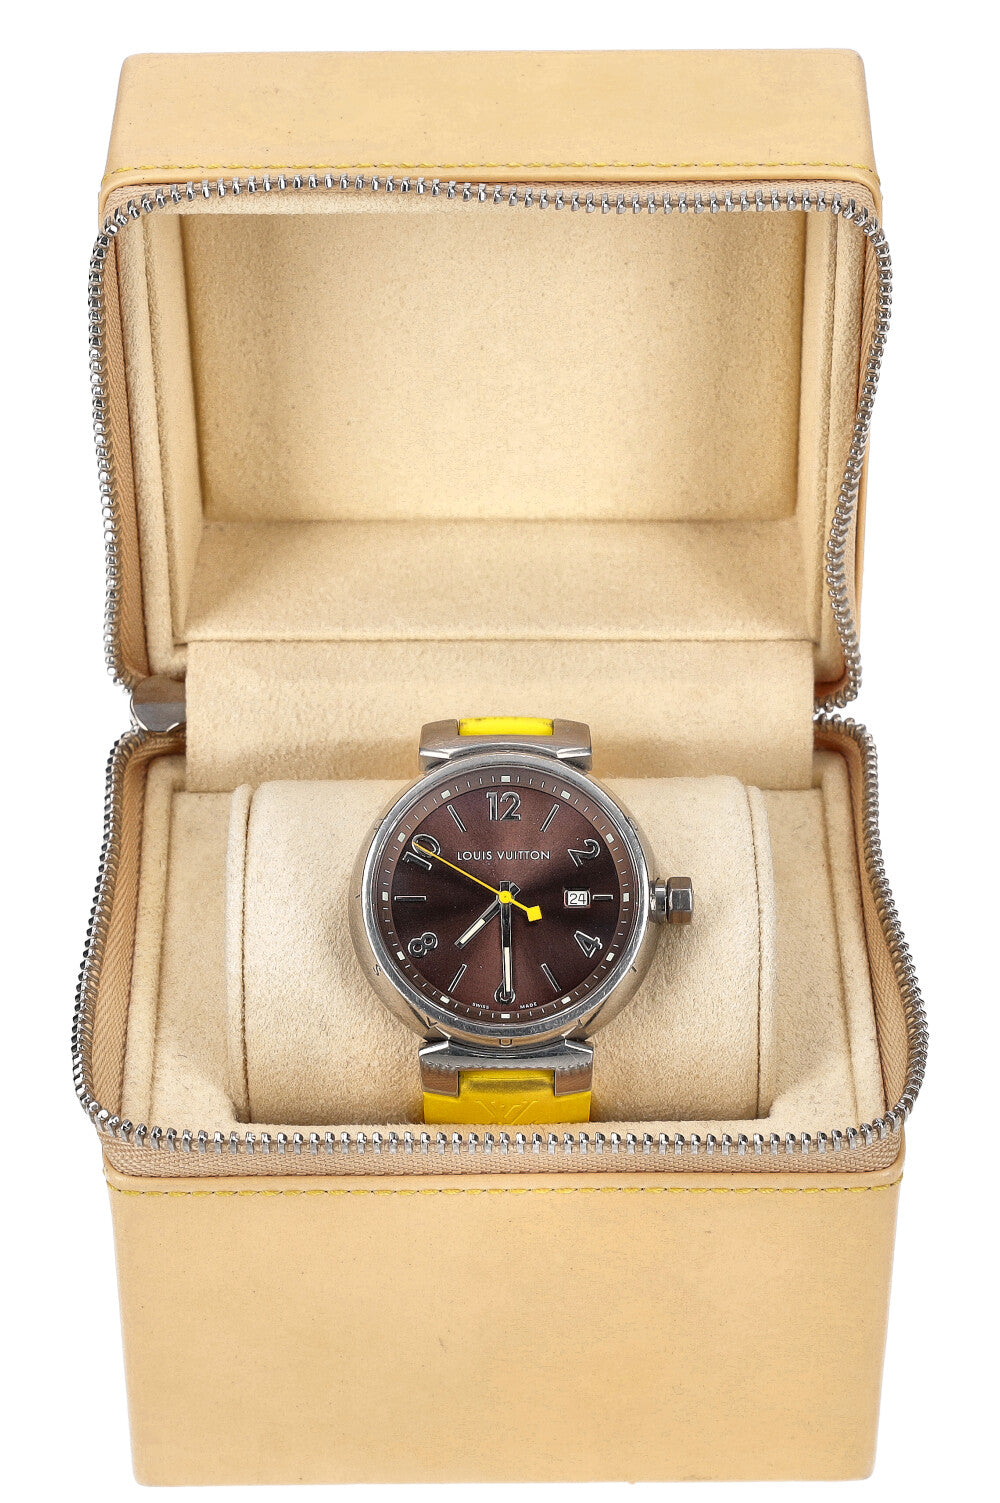 Authentic Louis Vuitton Tambour Quartz Watch in Brown Steel – Italy Station